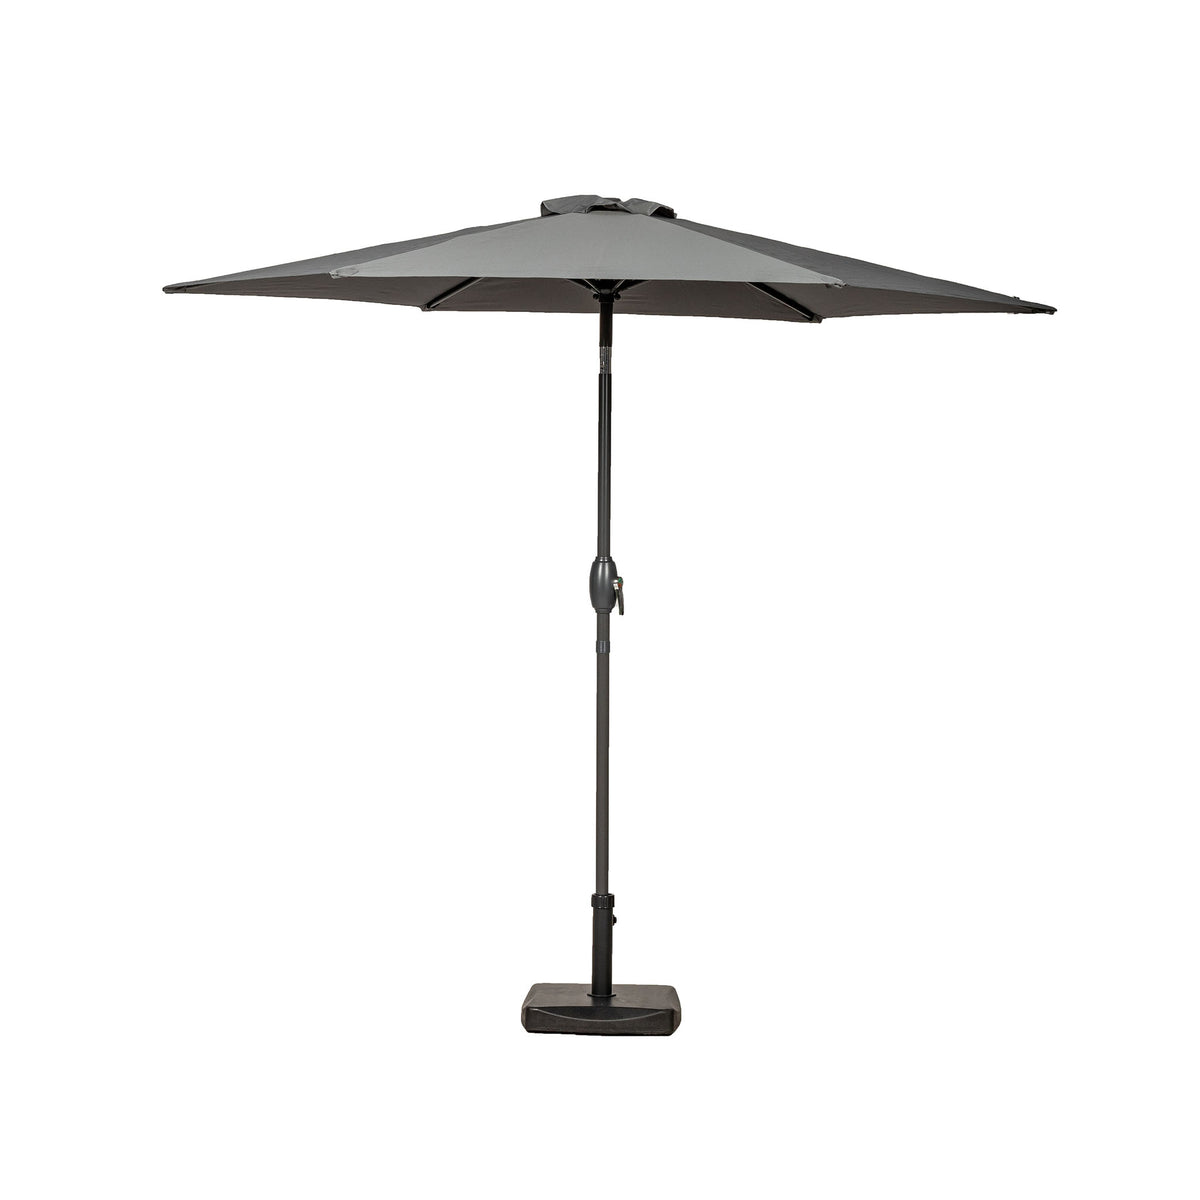 Grey 2.5m Parasol with Grey Aluminium Pole from Roseland Furniture